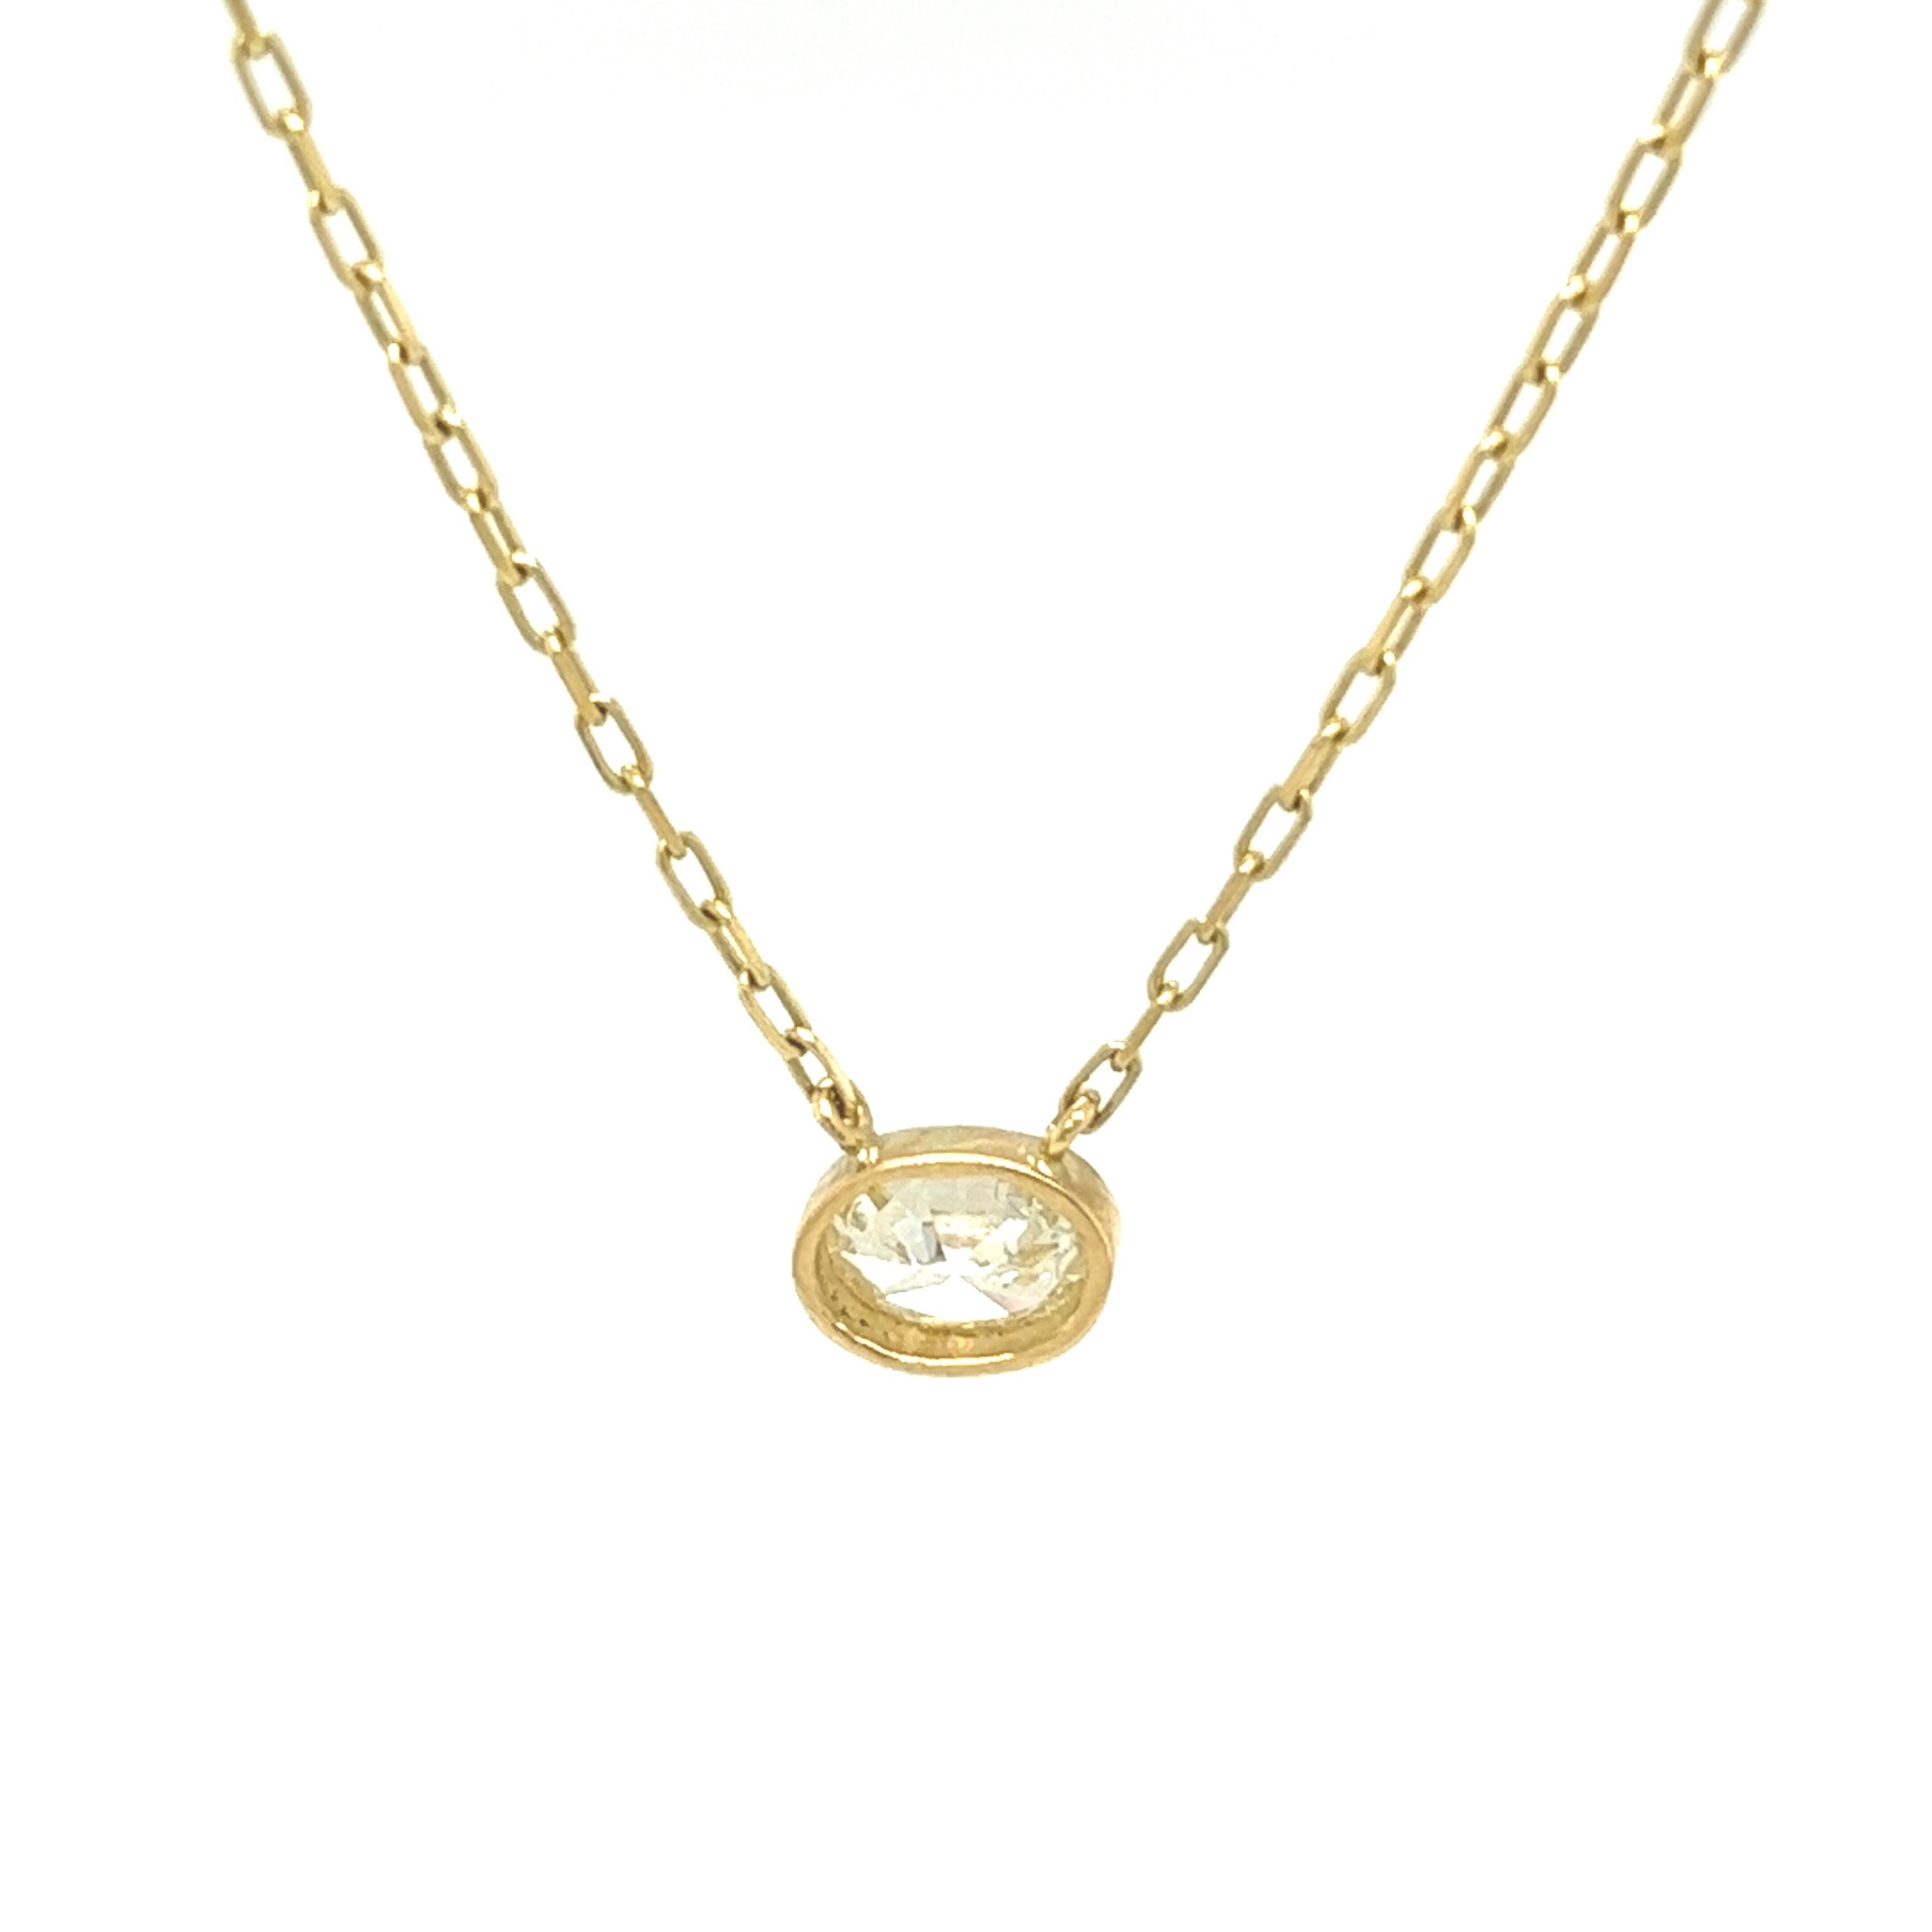 This beautiful Diamond is a natural oval-shaped Diamond that has been set in a 18ct Yellow Gold mount. 

Additional Information:
The chain length is 16